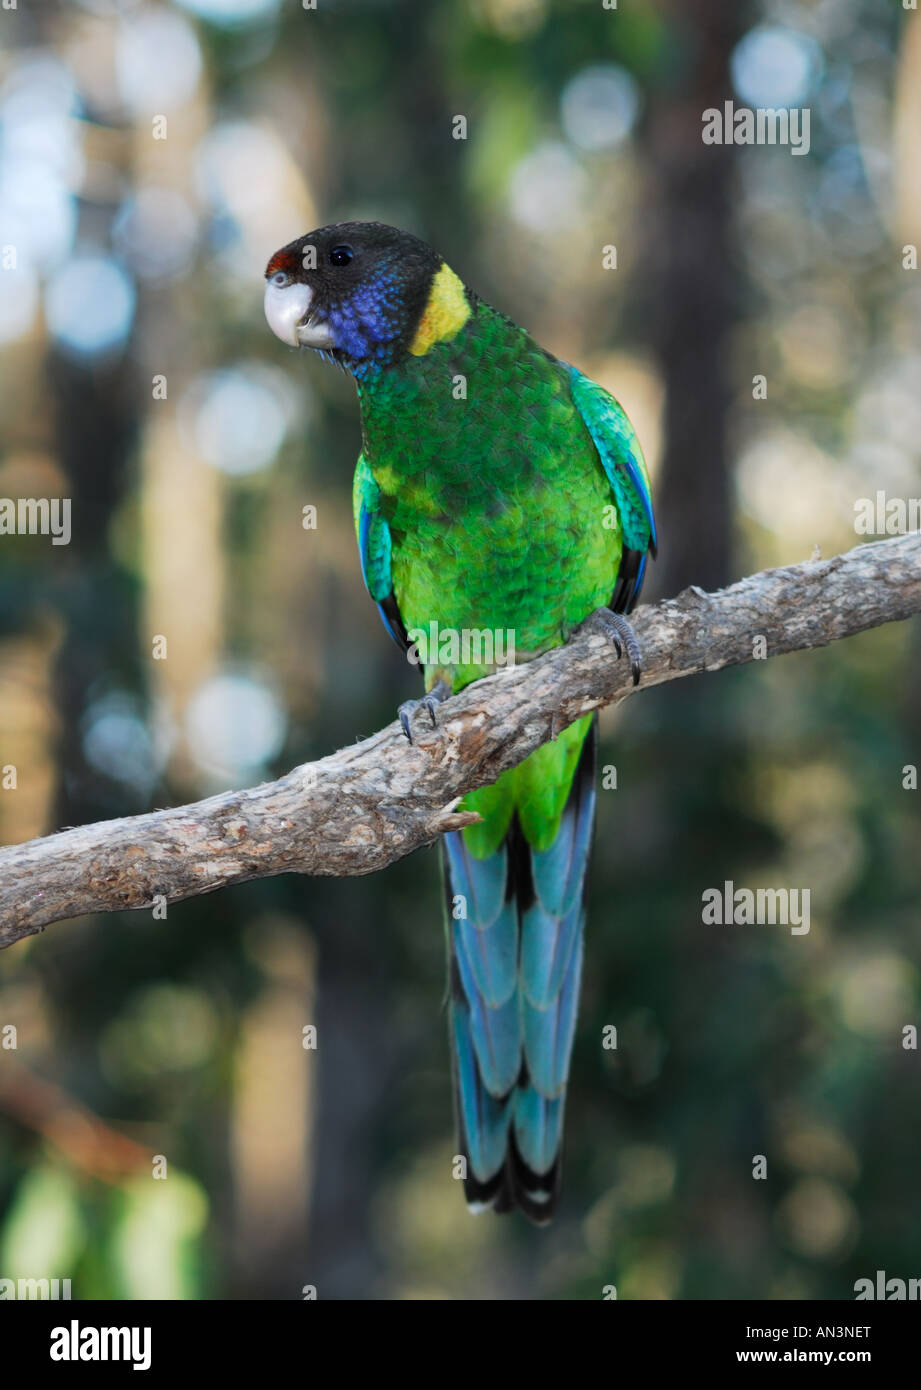 A Twenty Eight Parrot, a variant of the Port Lincoln Ringneck Parrot. Stock Photo